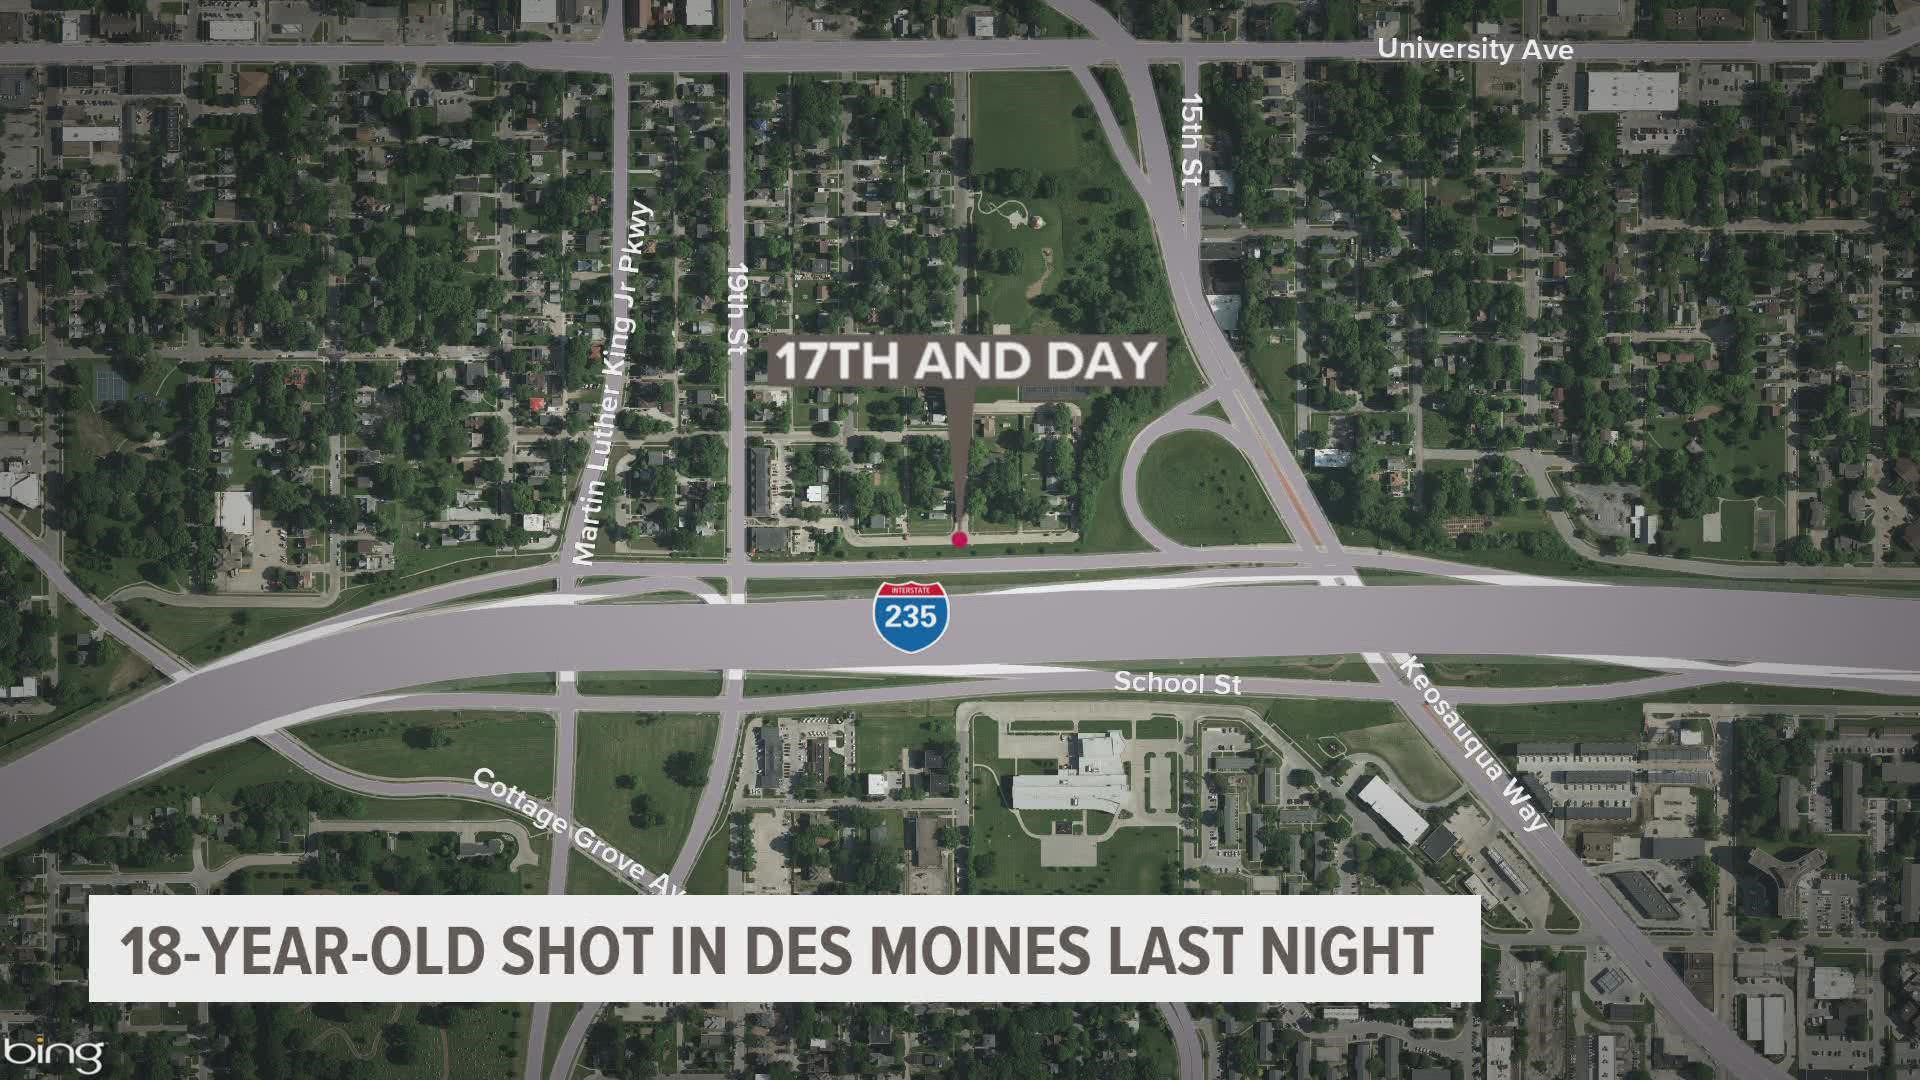 The second shooting put an 18-year-old in the hospital in critical condition.